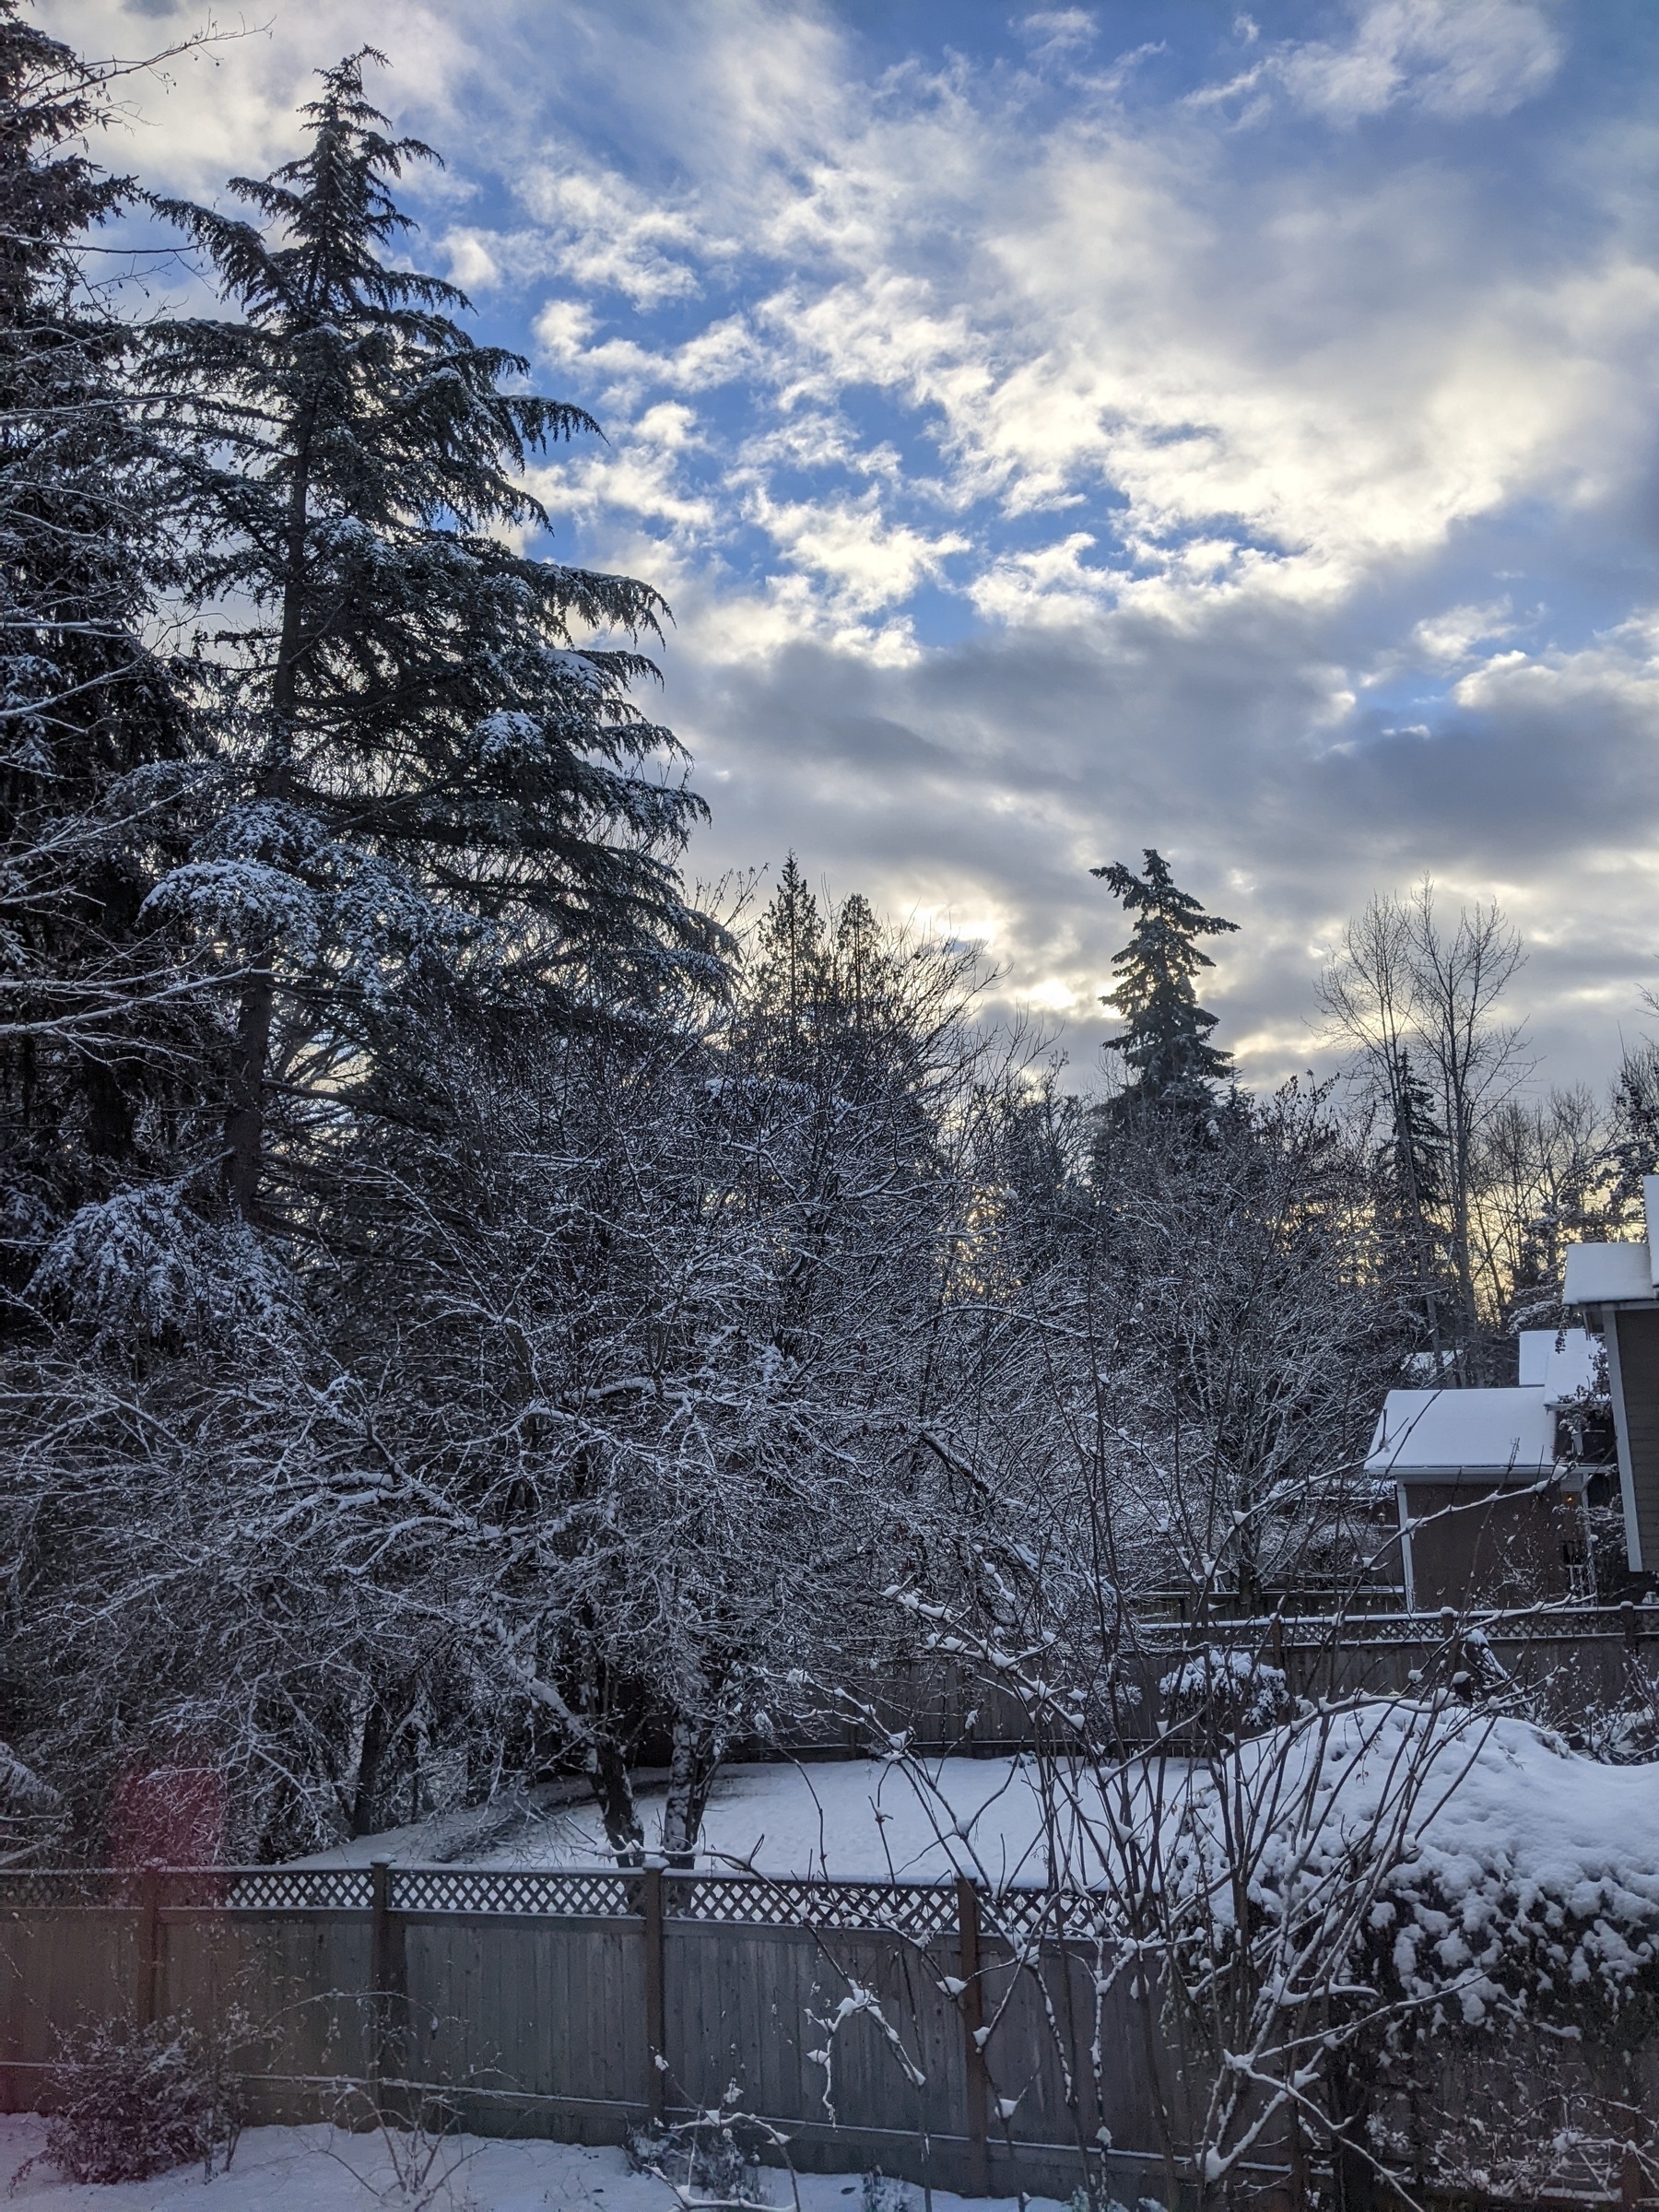 Blue sky gray clouds, and a warm horizon glow above a snowy suburban backyard edged with tall conifers